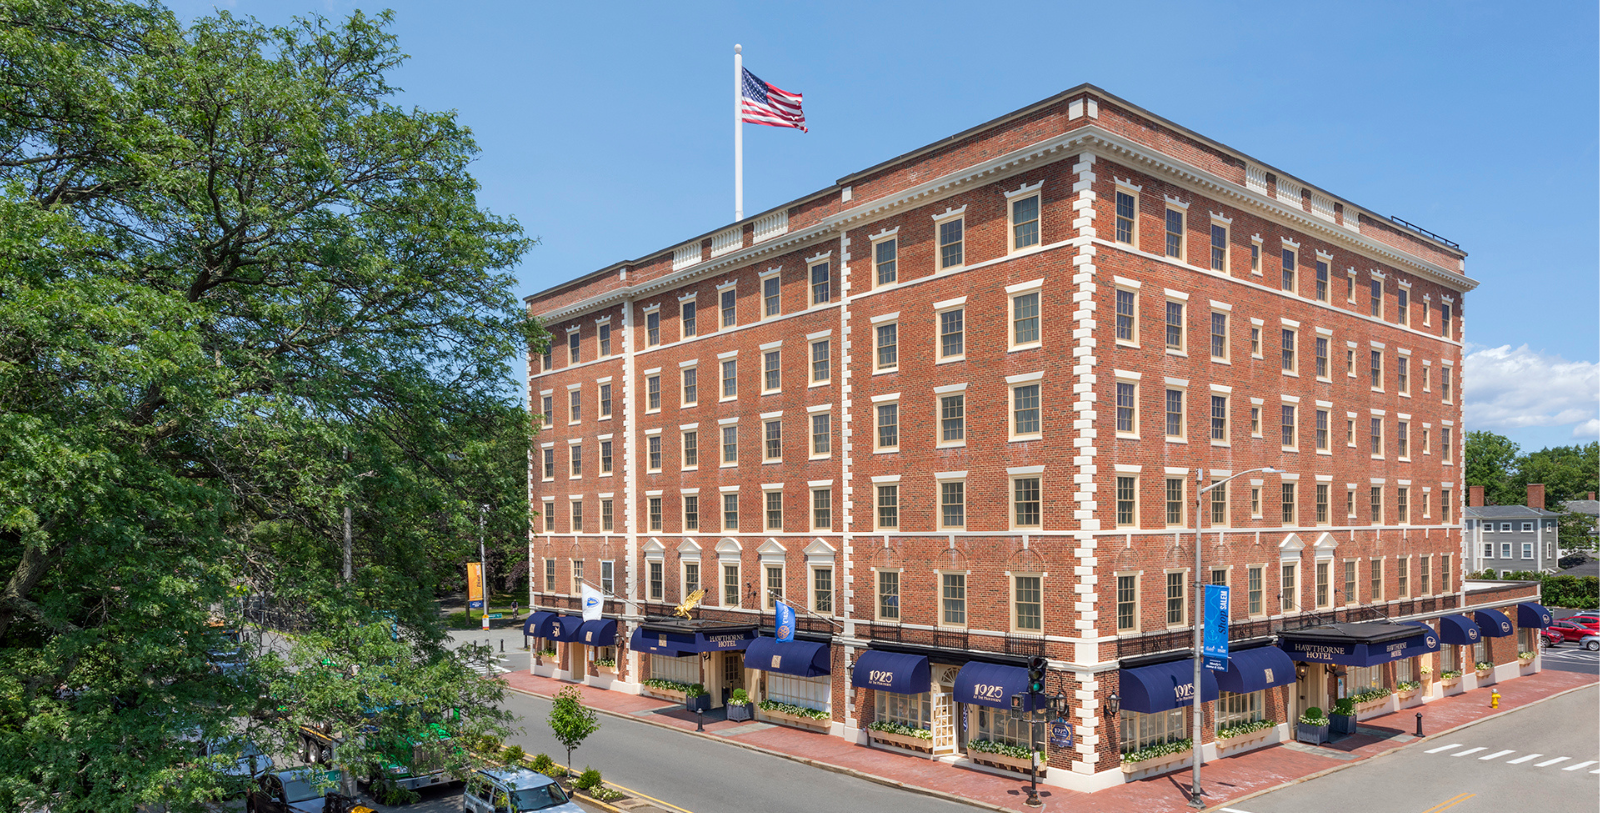 Image of hotel exterior Hawthorne Hotel, 1925, Member of Historic Hotels of America, in Salem, Massachusetts, Overview